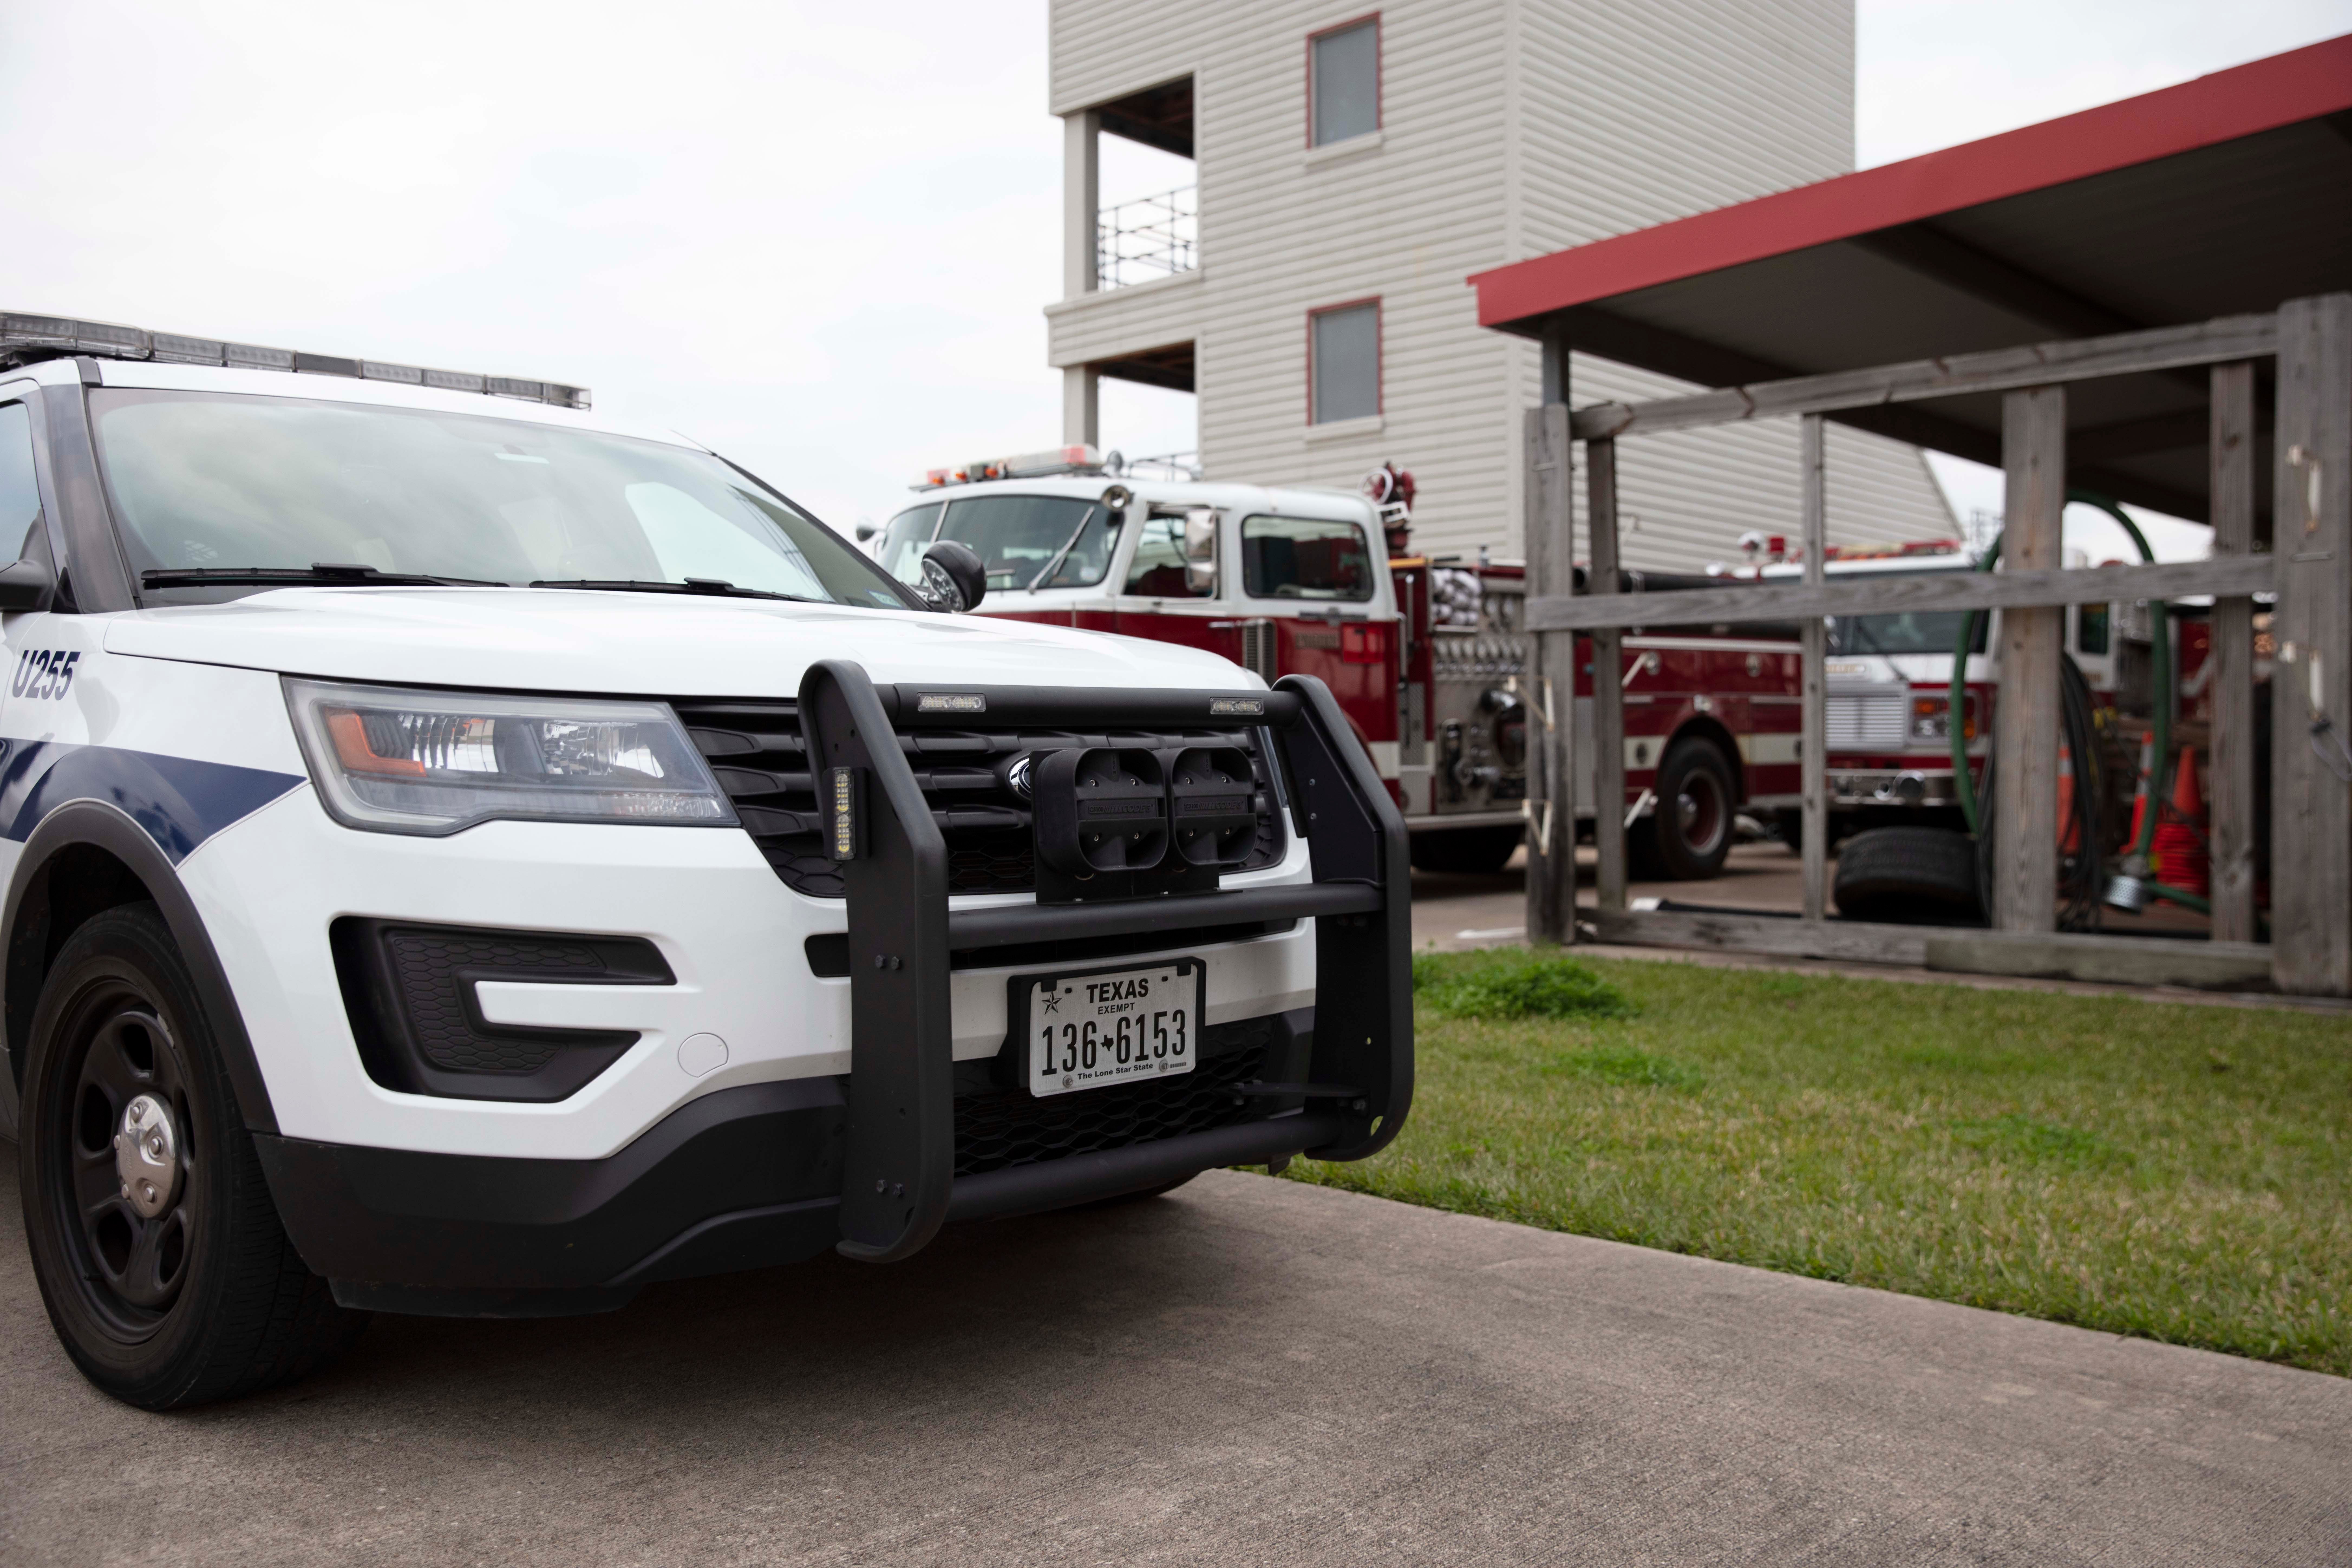 Pearland PD SUV Parked Next to Firetruck